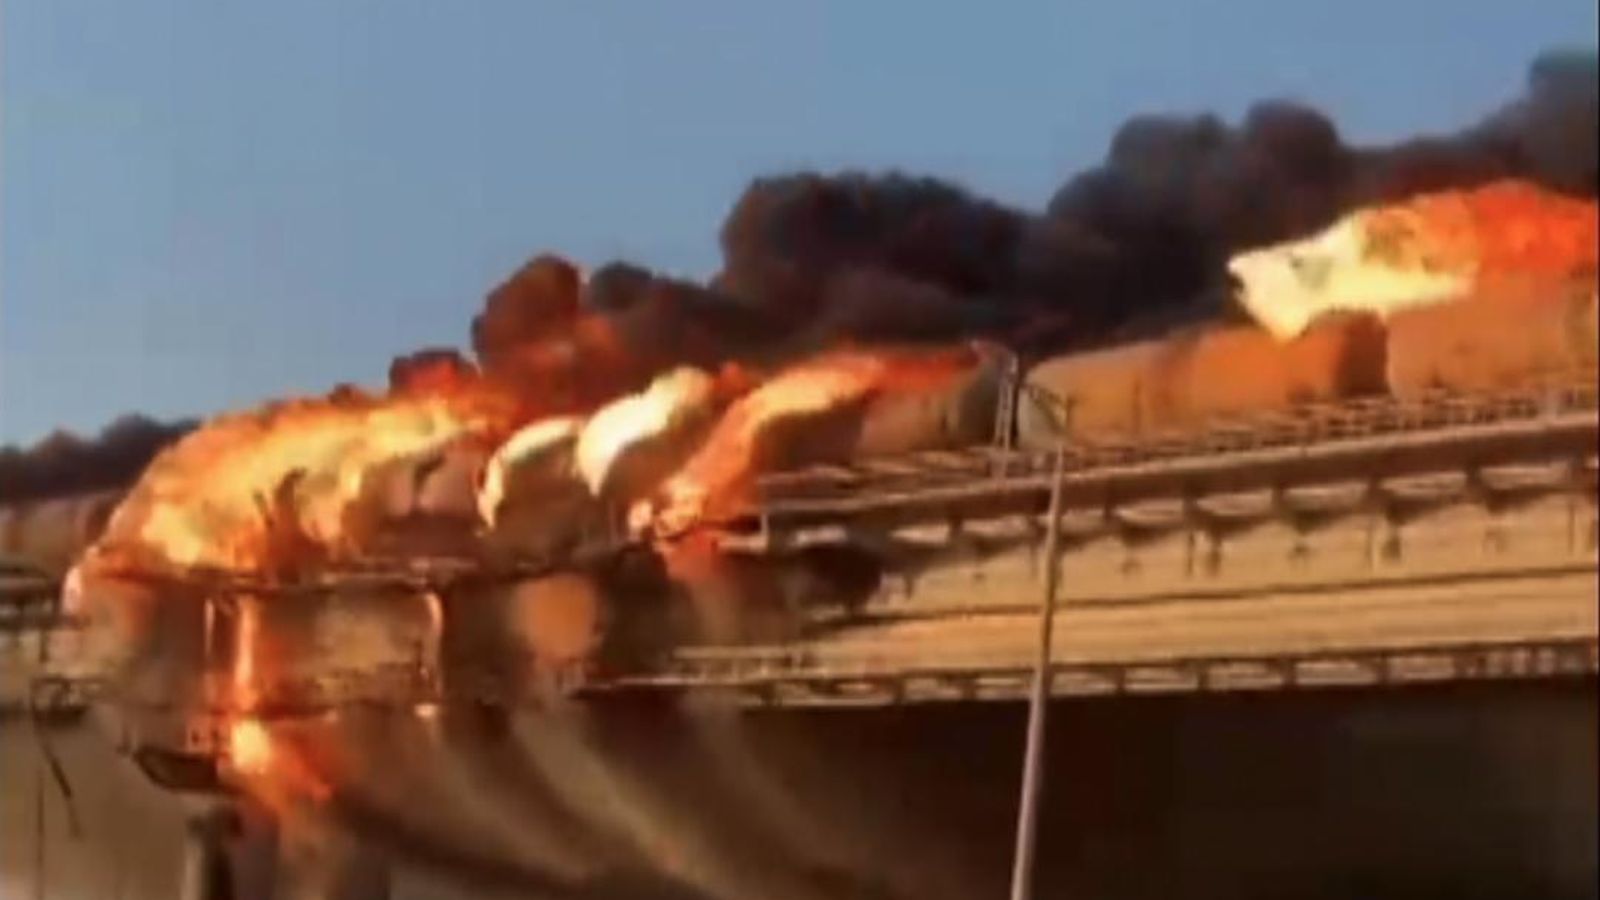 Ukraine war: Key bridge linking Russia to Crimea partially destroyed after explosion